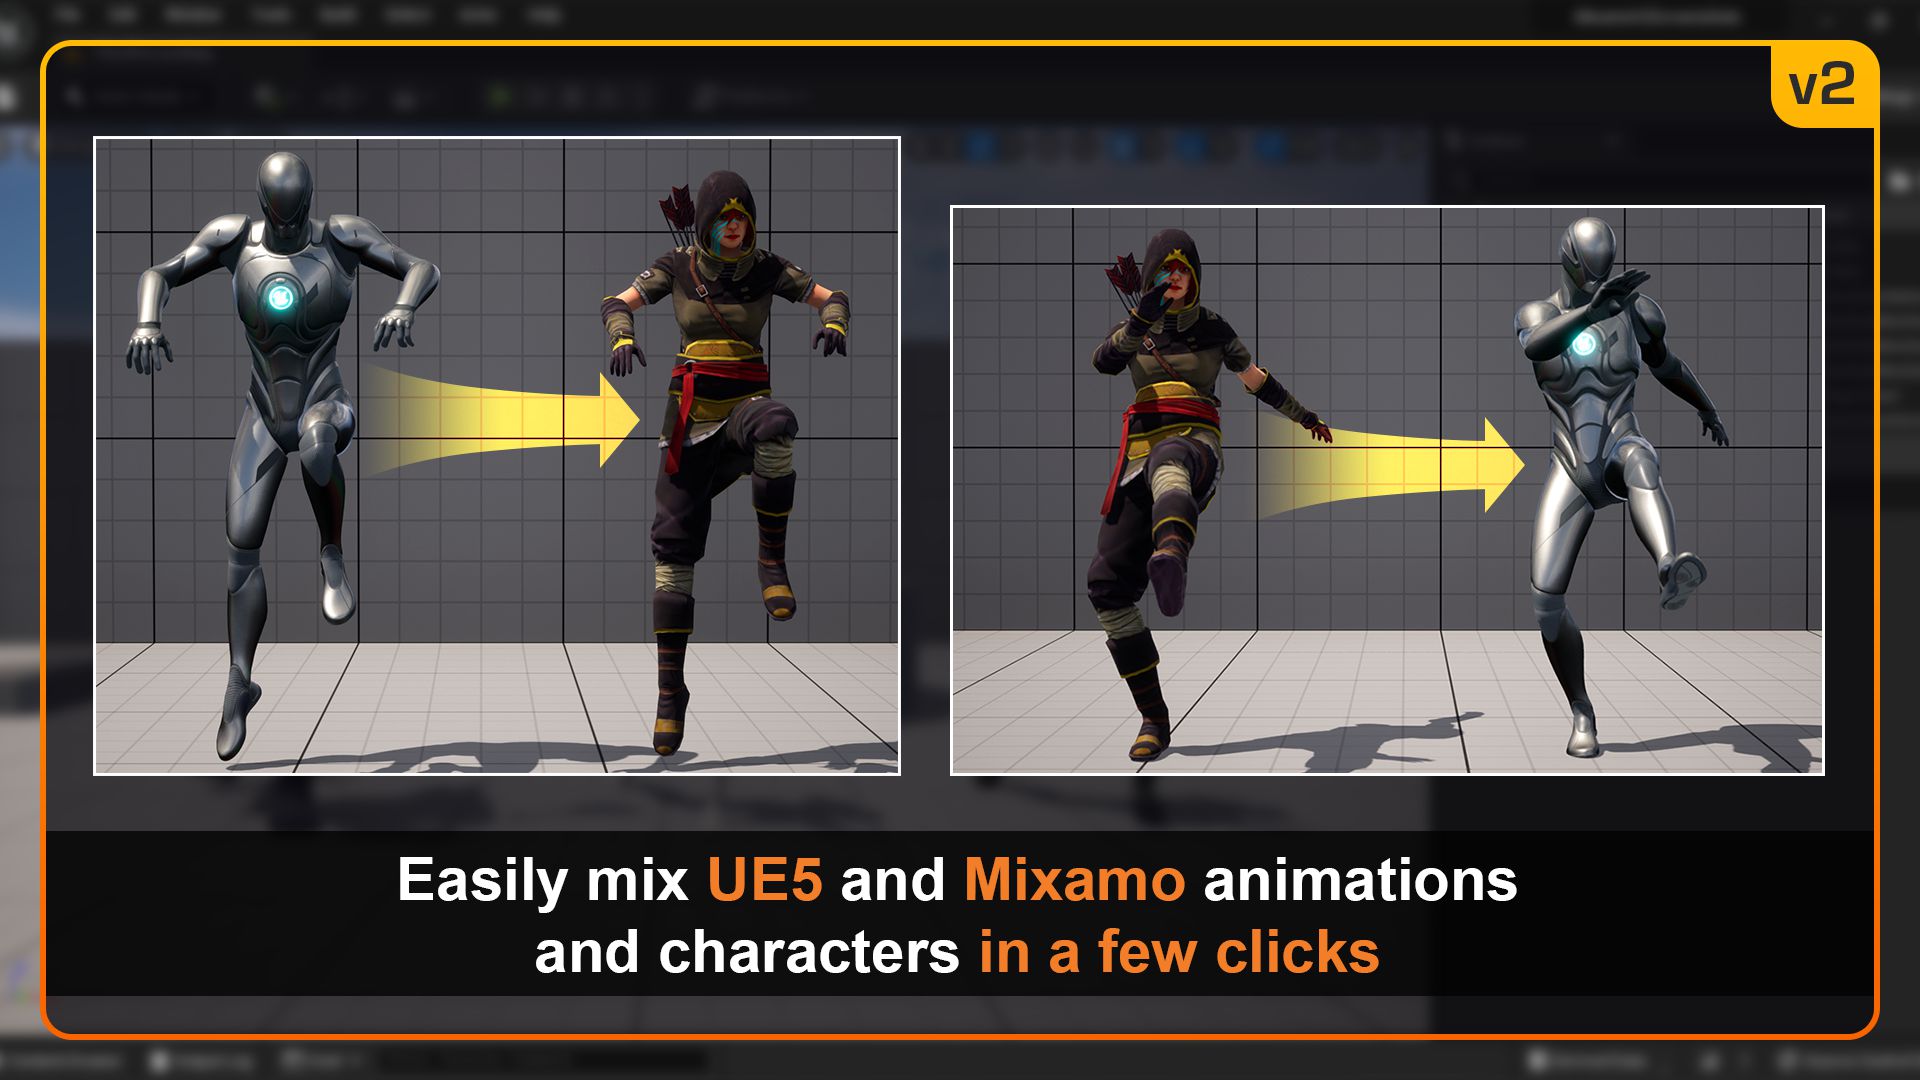 Easily mix UE5 and Mixamo animtions and characters in a few clicks